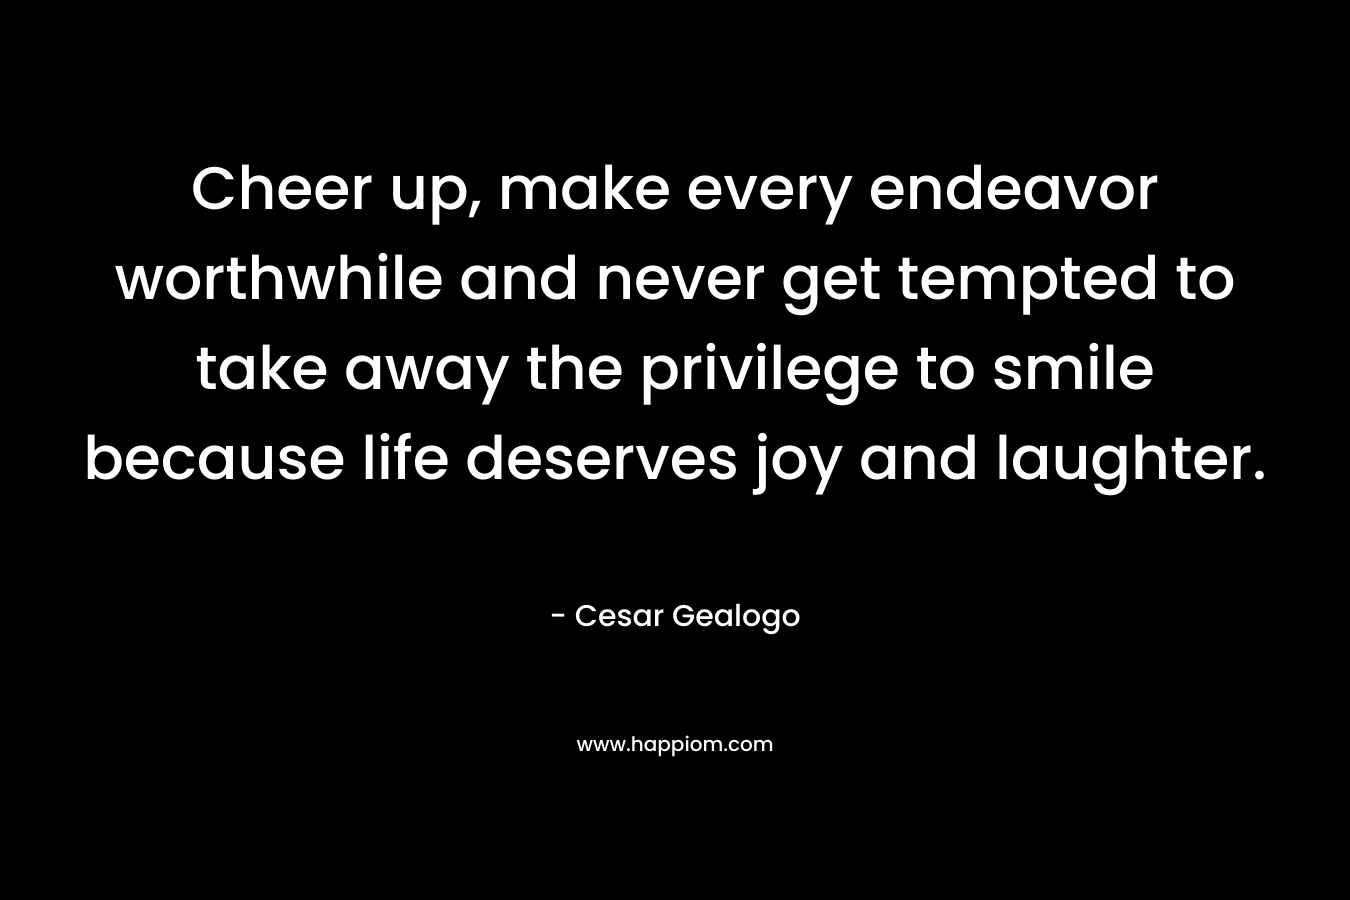 Cheer up, make every endeavor worthwhile and never get tempted to take away the privilege to smile because life deserves joy and laughter.